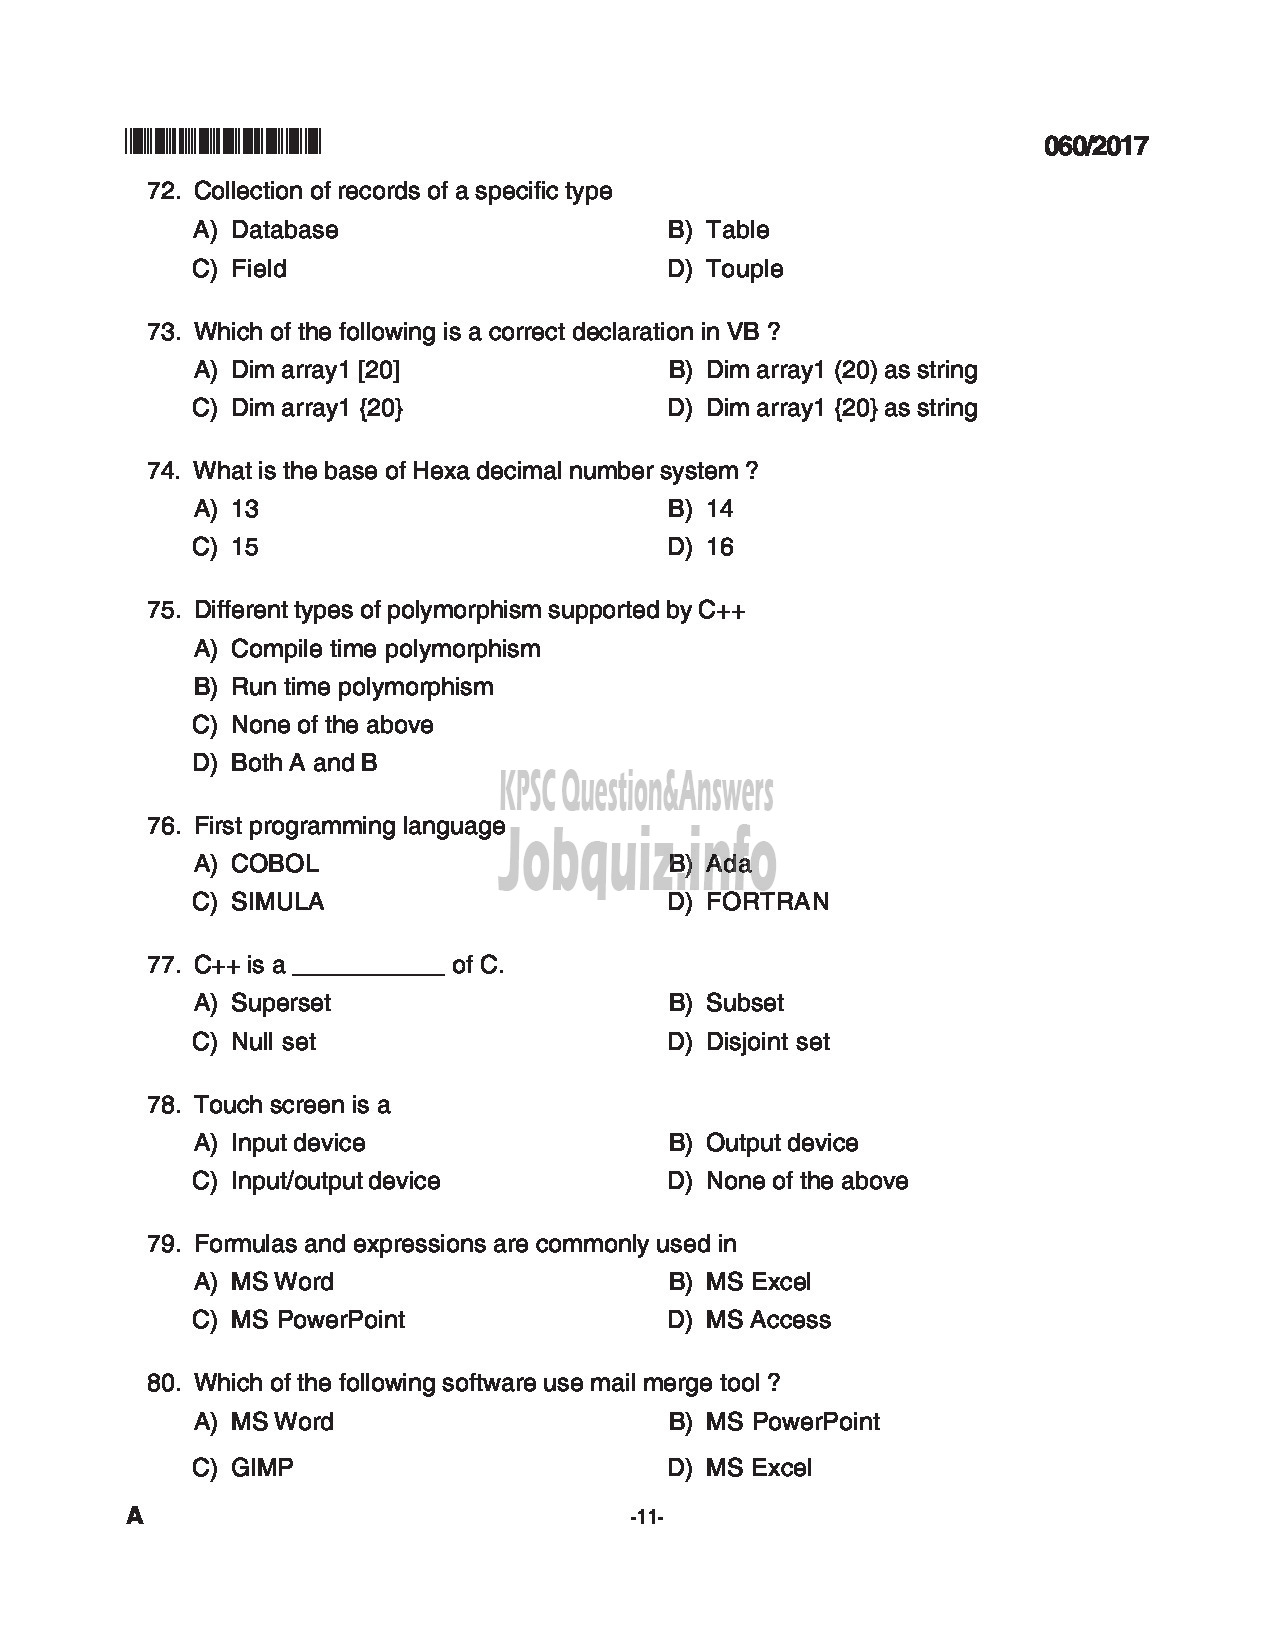 Kerala PSC Question Paper - TRADESMAN COMPUTER ENGINEERING TECHNICAL EDUCATION QUESTION PAPER-11